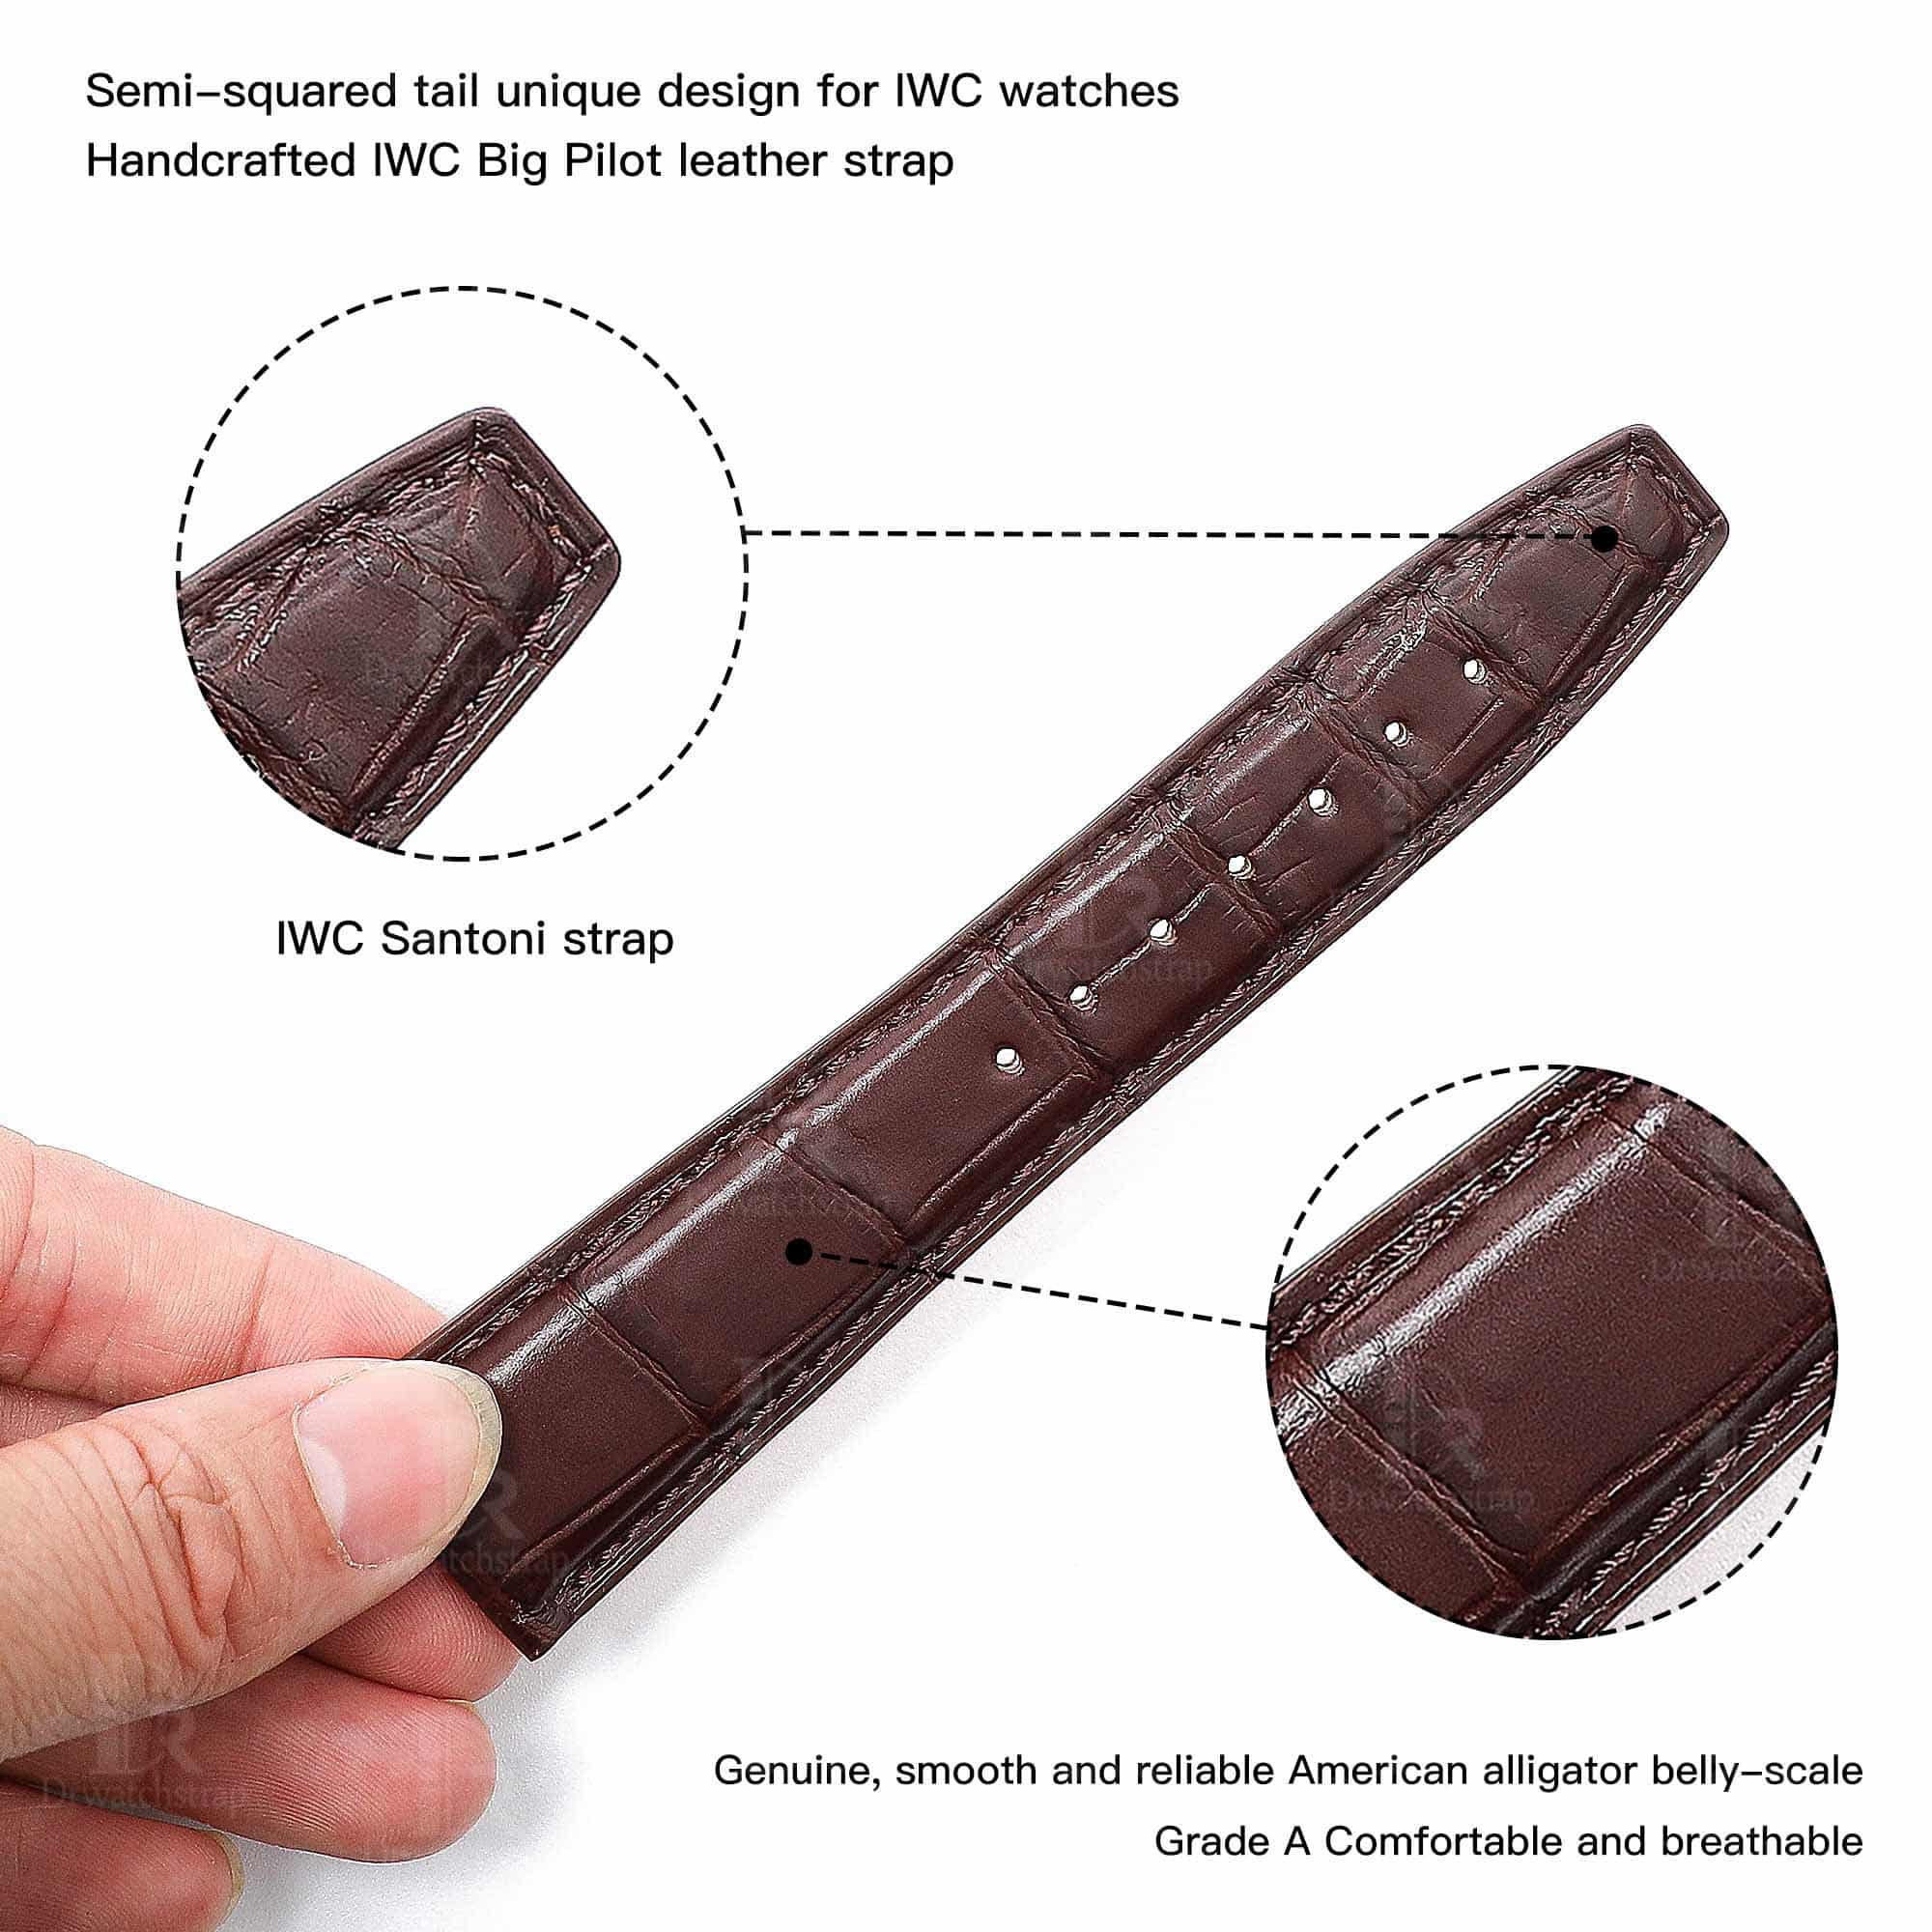 Best quality Grade A alligator Belly-scale brown leather Santoni 20mm 22mm IWC watch strap and watch band replacement for IWC Portofino / Pilot's watch at a low price - Shop handcrafted OEM watch bands online